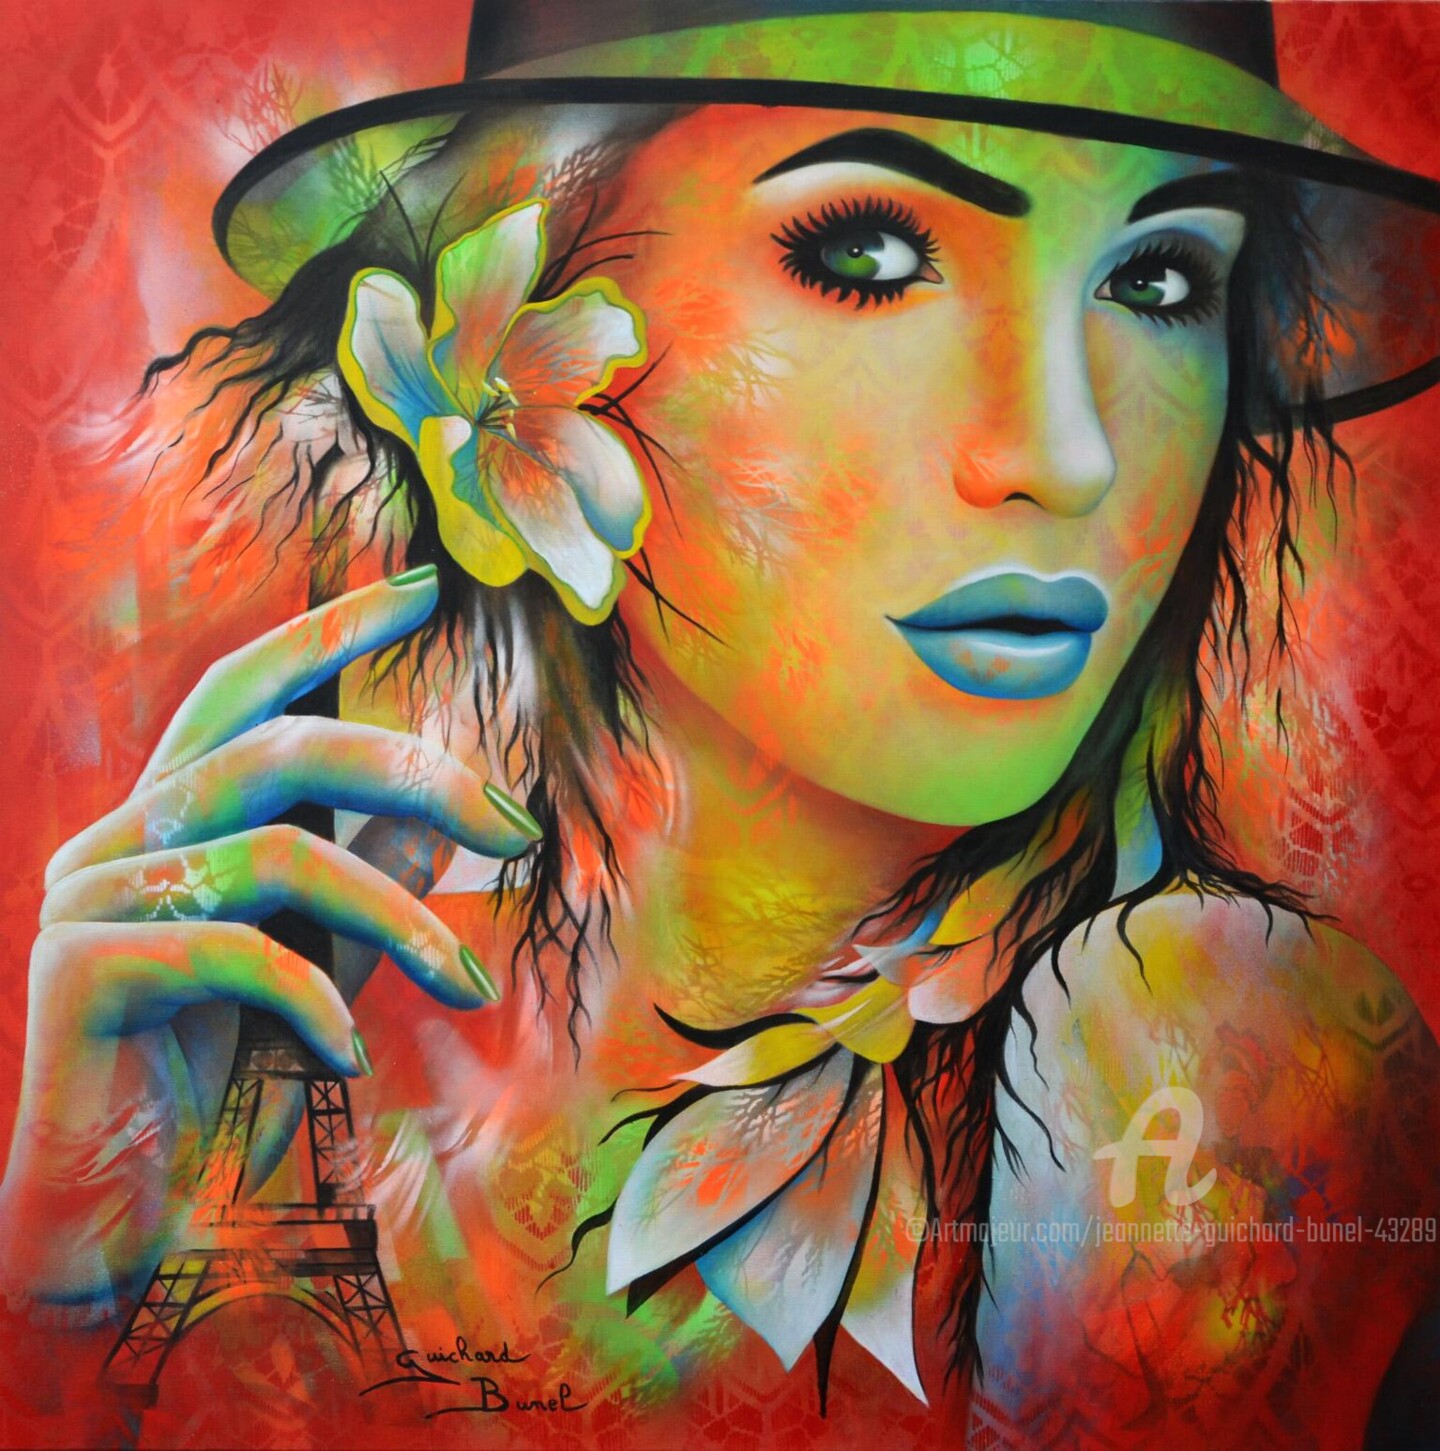 Jeannette Guichard-Bunel - french touch